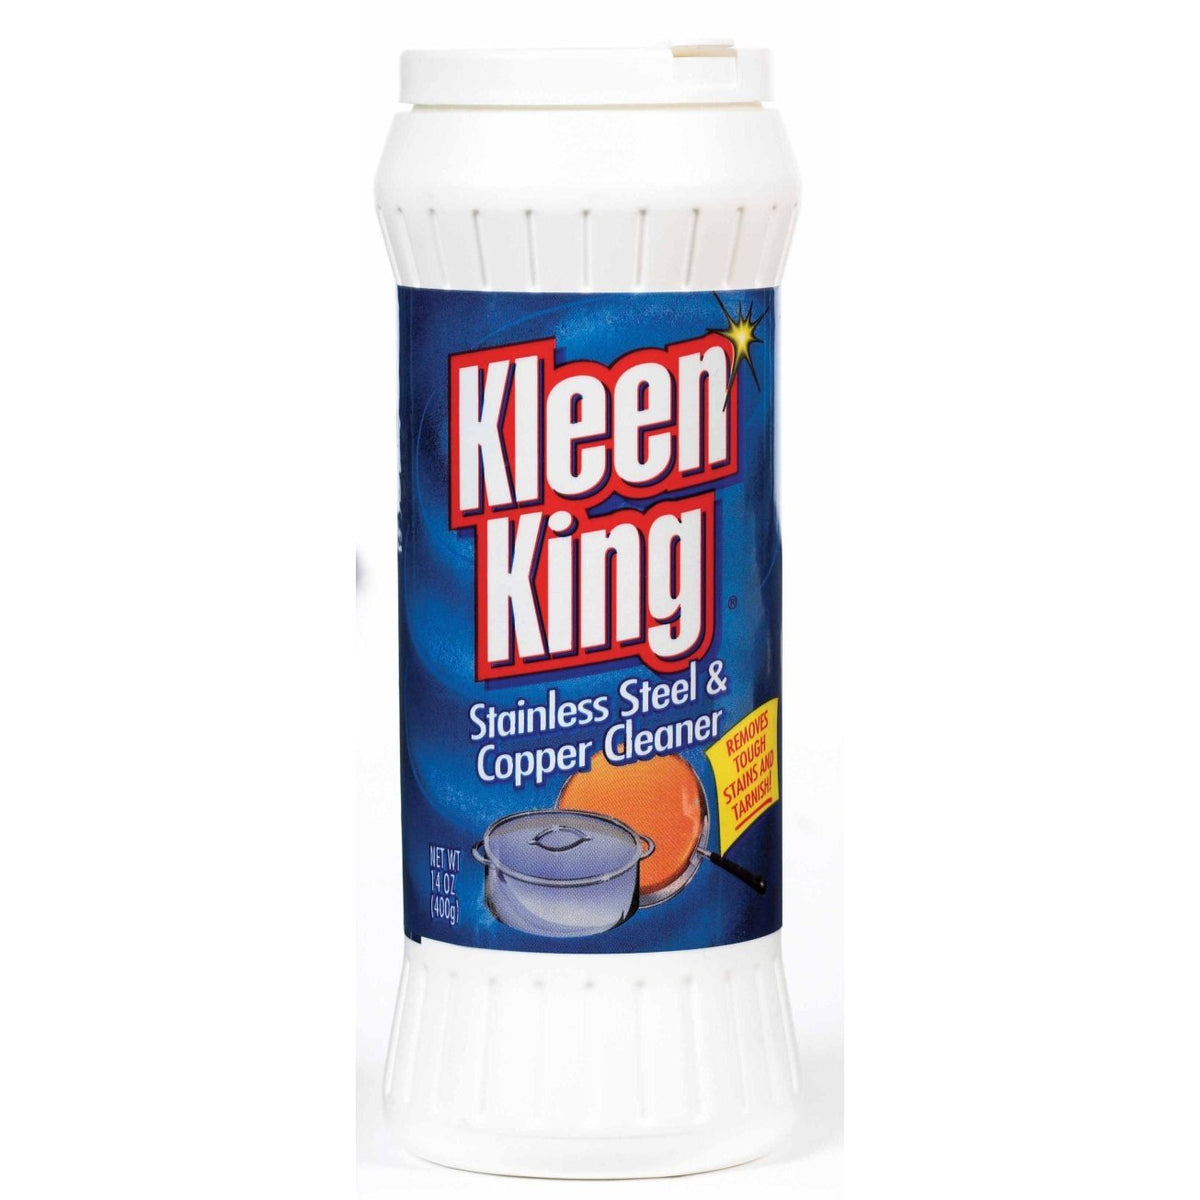 Buy kleen king copper cleaner - Online store for chemicals & cleaners, stainless steel, marble & granite in USA, on sale, low price, discount deals, coupon code